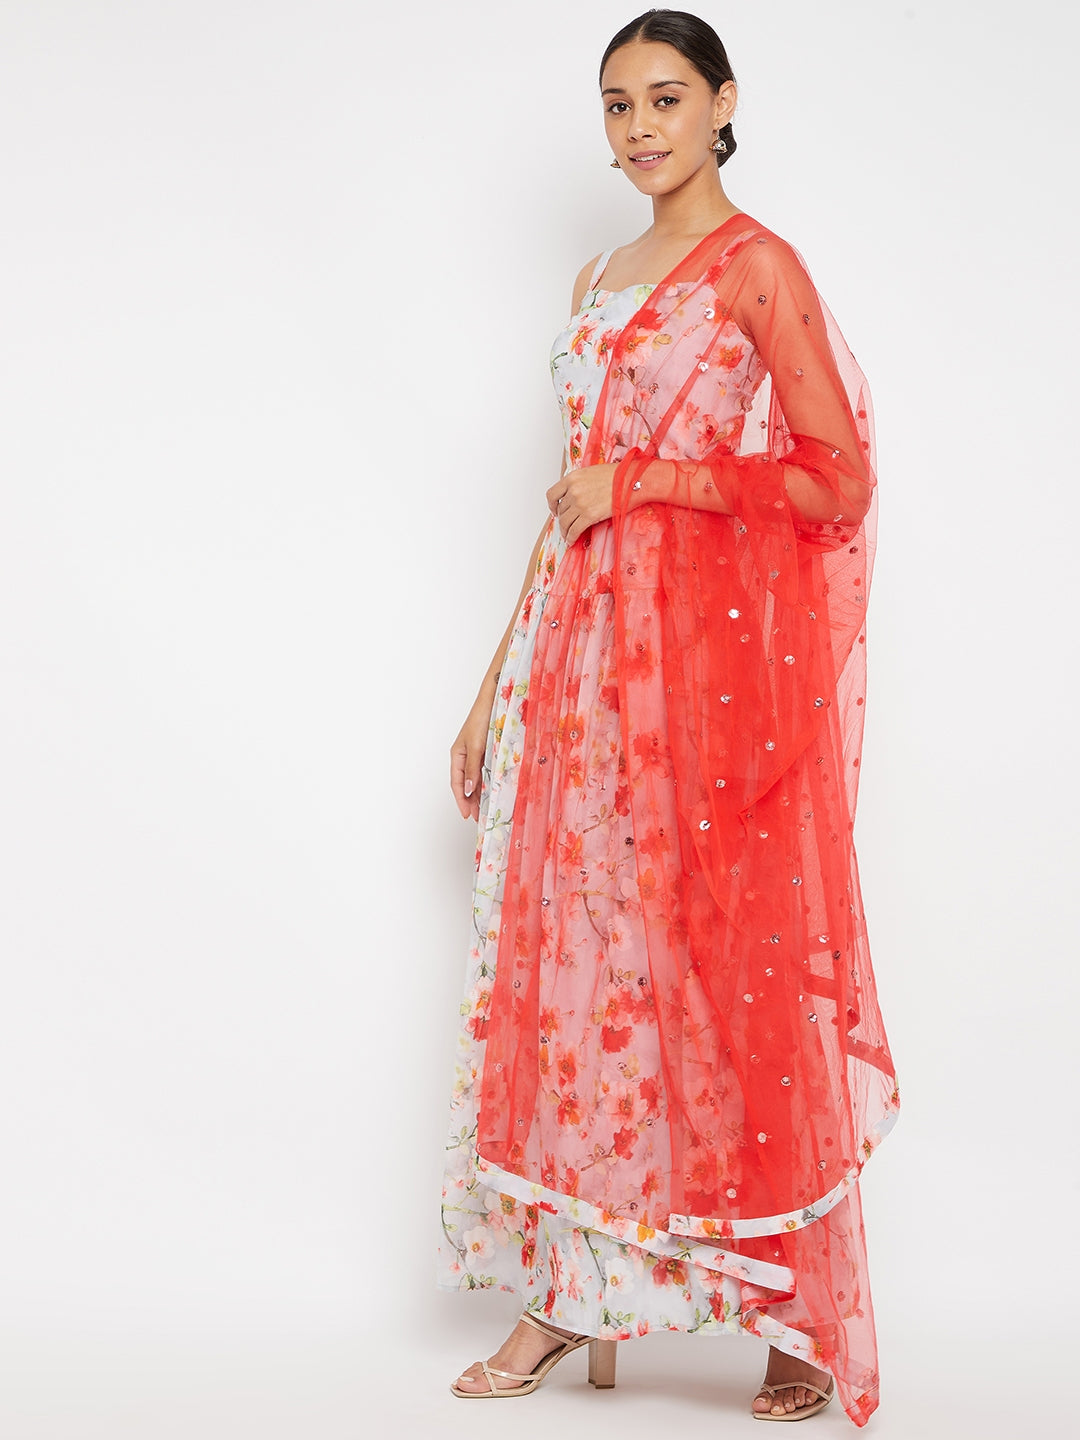 Women Off-White Floral Printed Regular Top with Skirt & With Dupatta